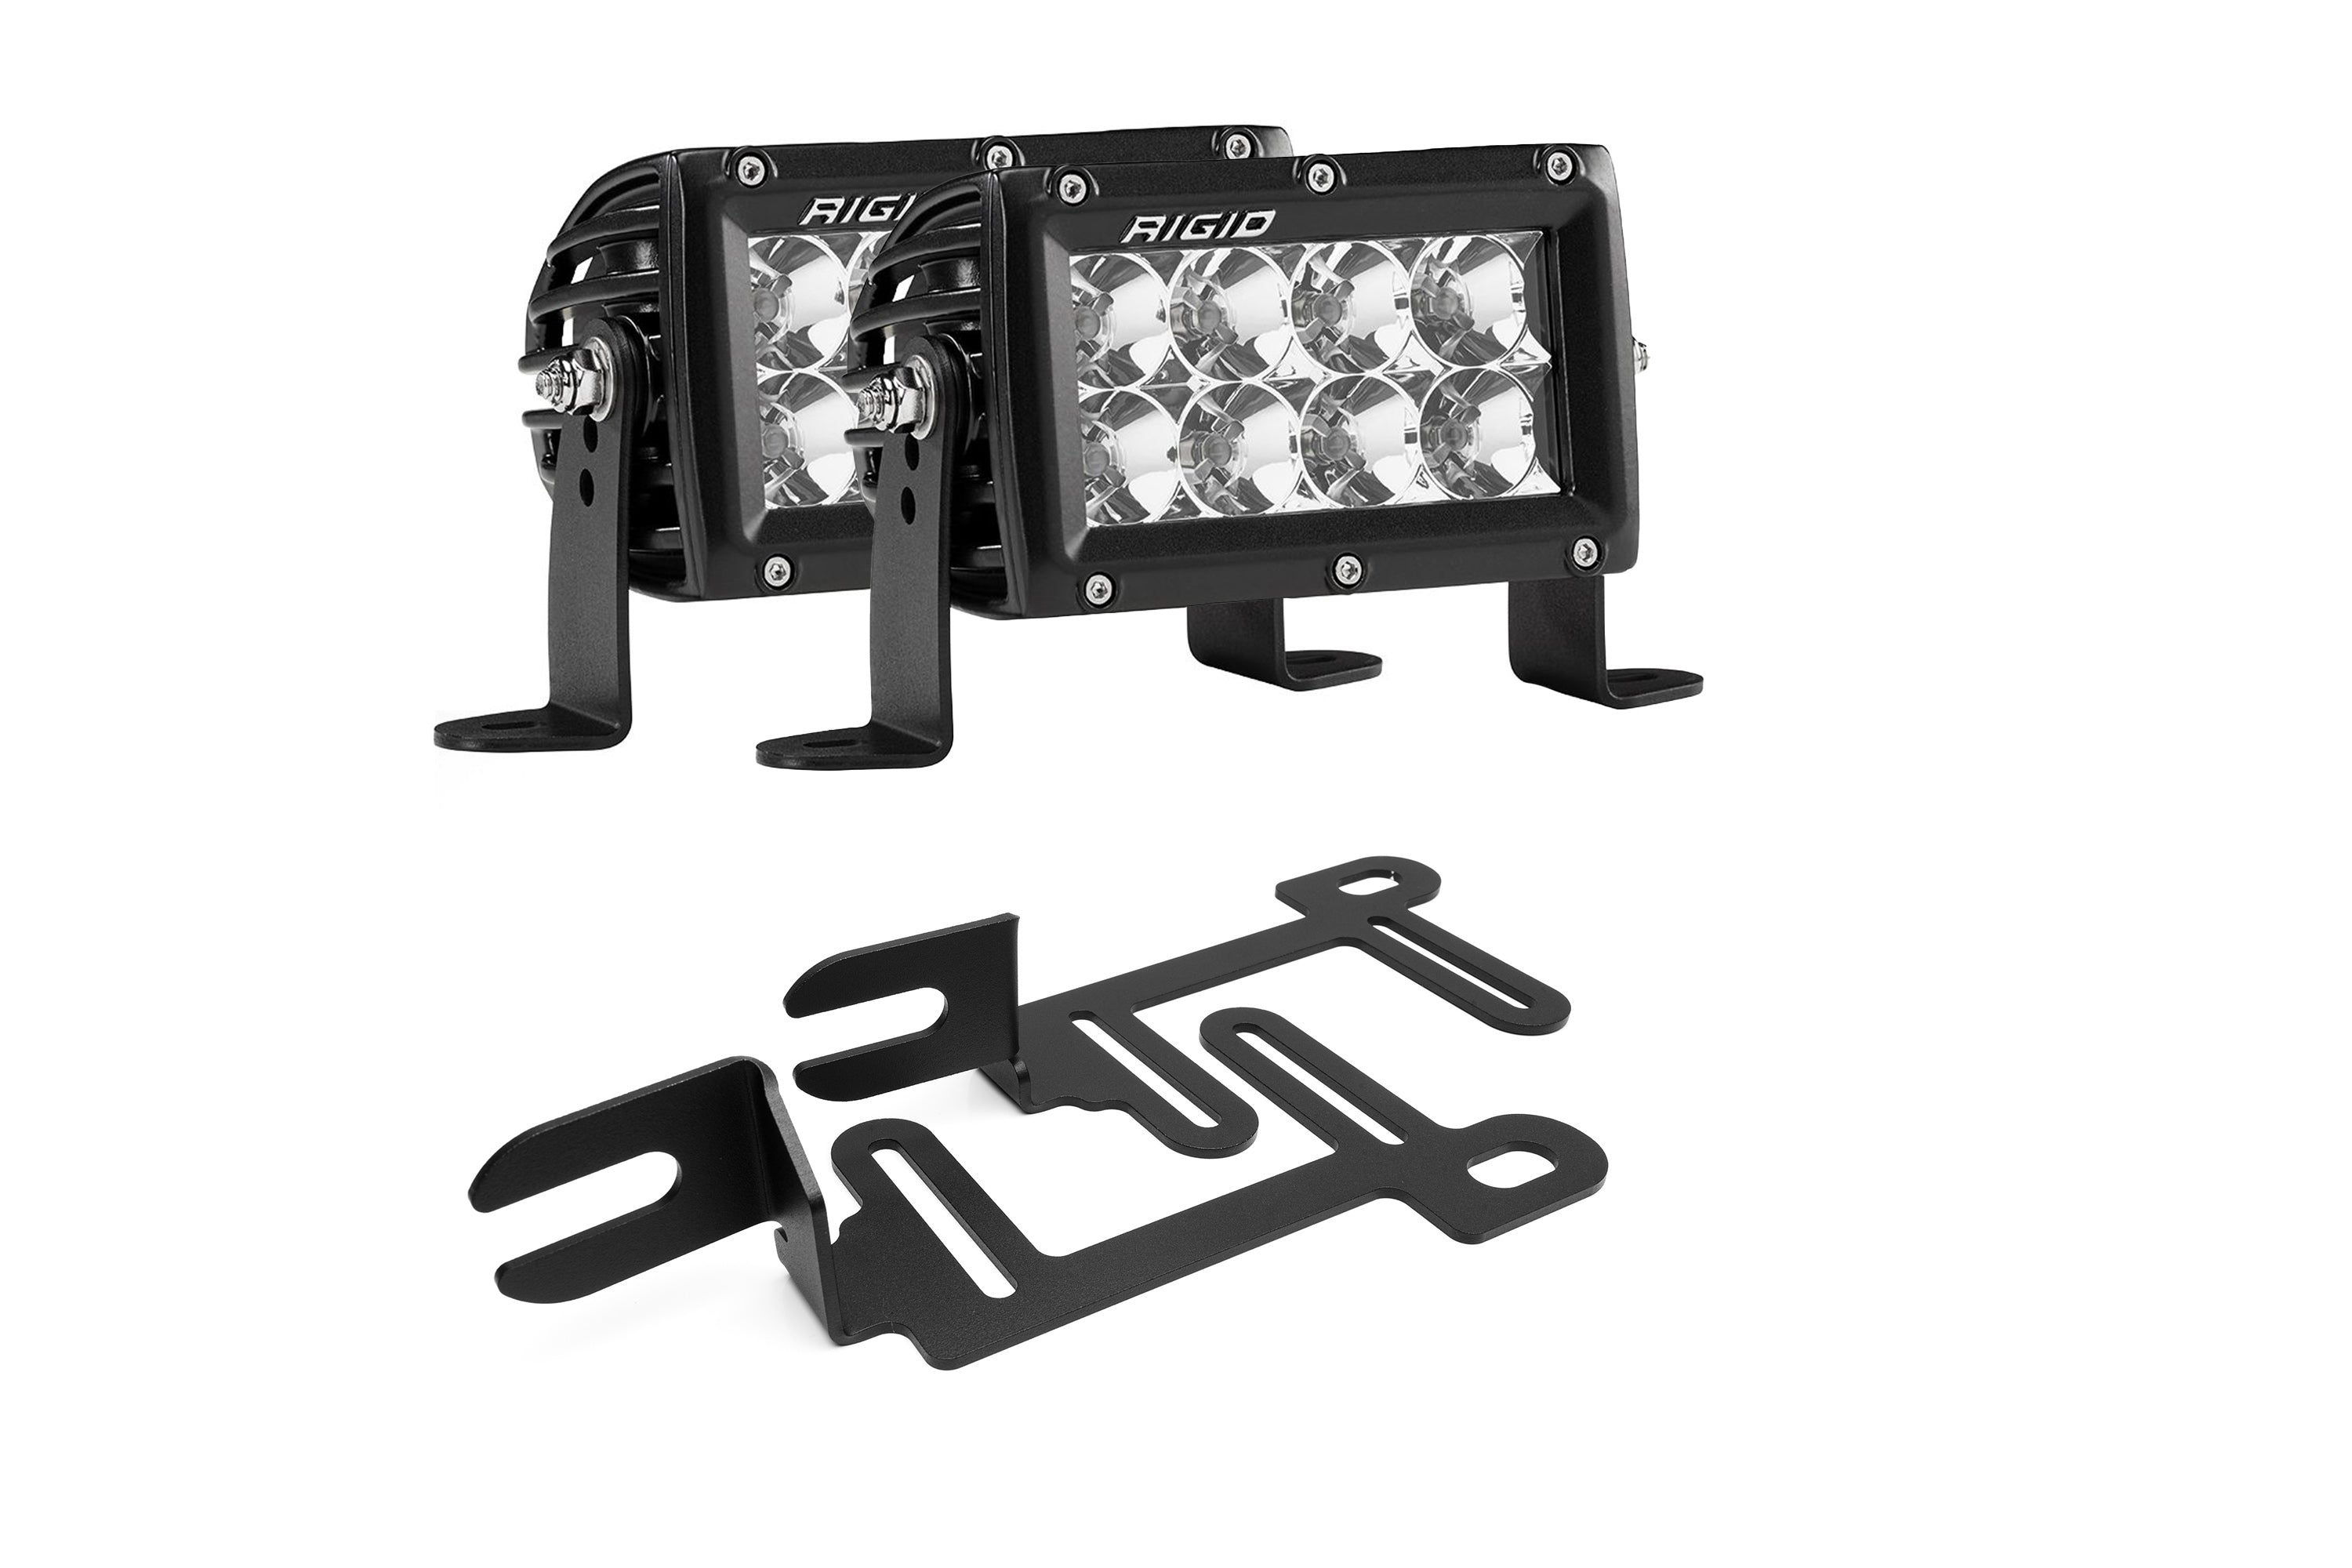 SPV Parts 2019-2022 Ford Ranger Lower Bumper Grille Light Kit Rigid Pro E4-Series With No Drill Mounts